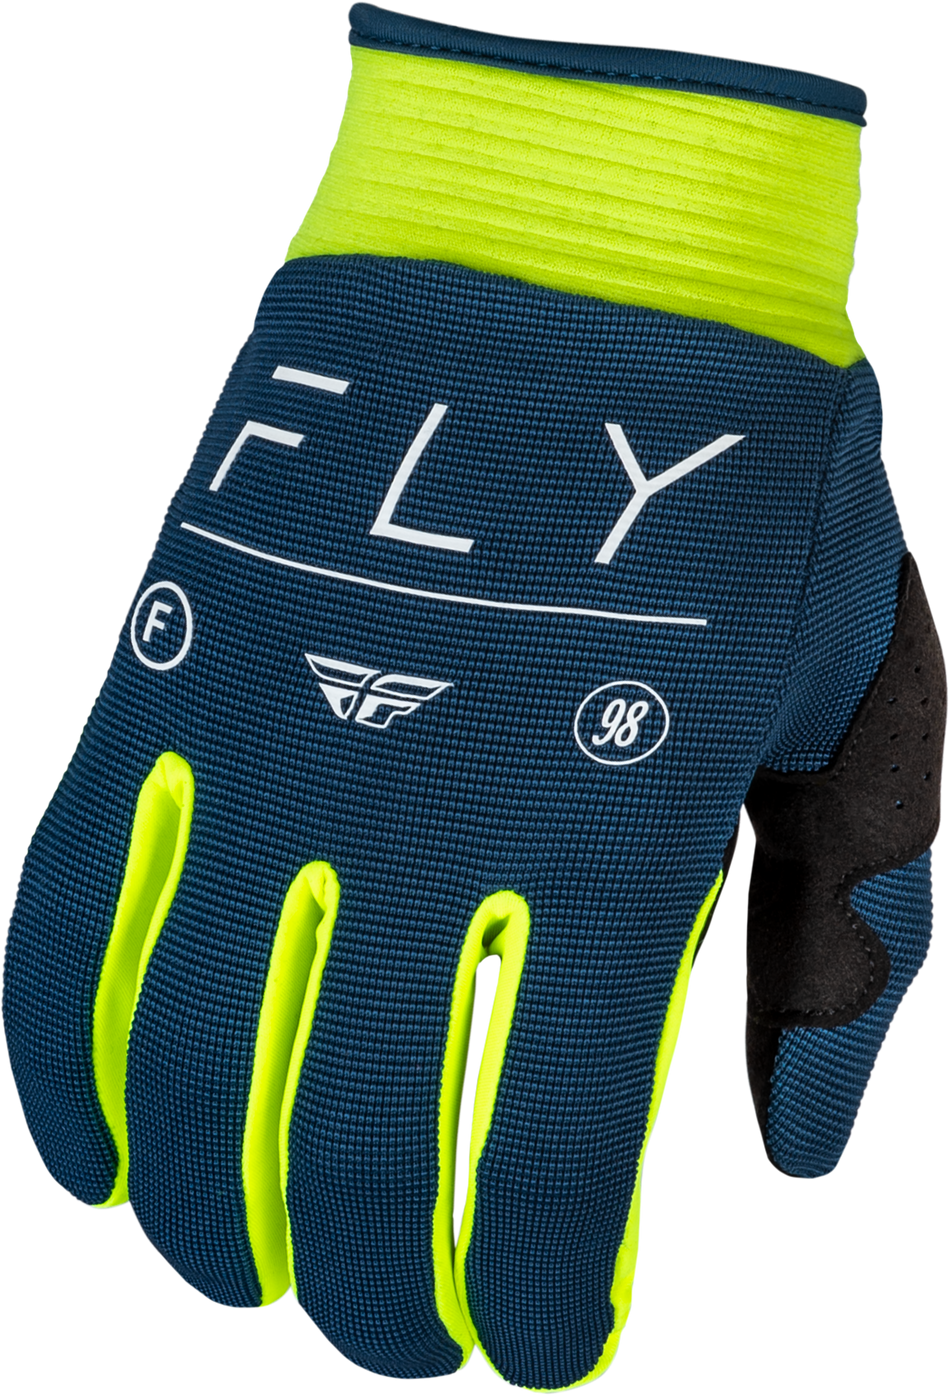 FLY RACING Youth F-16 Gloves Navy/Hi-Vis/White Y2xs 377-912Y2XS